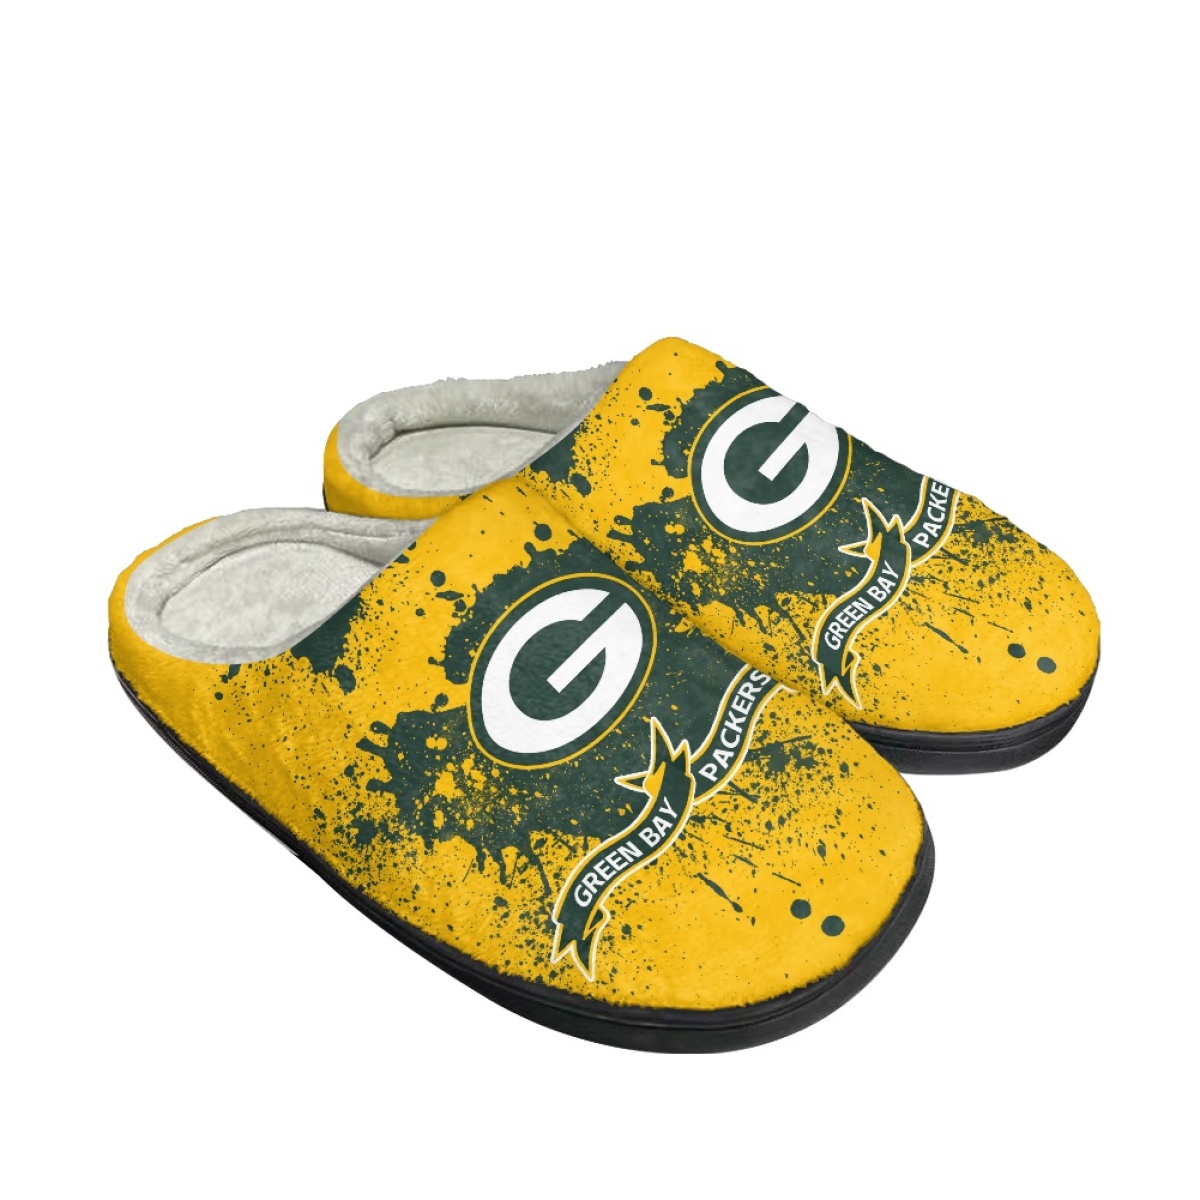 Men's Green Bay Packers Slippers/Shoes 006